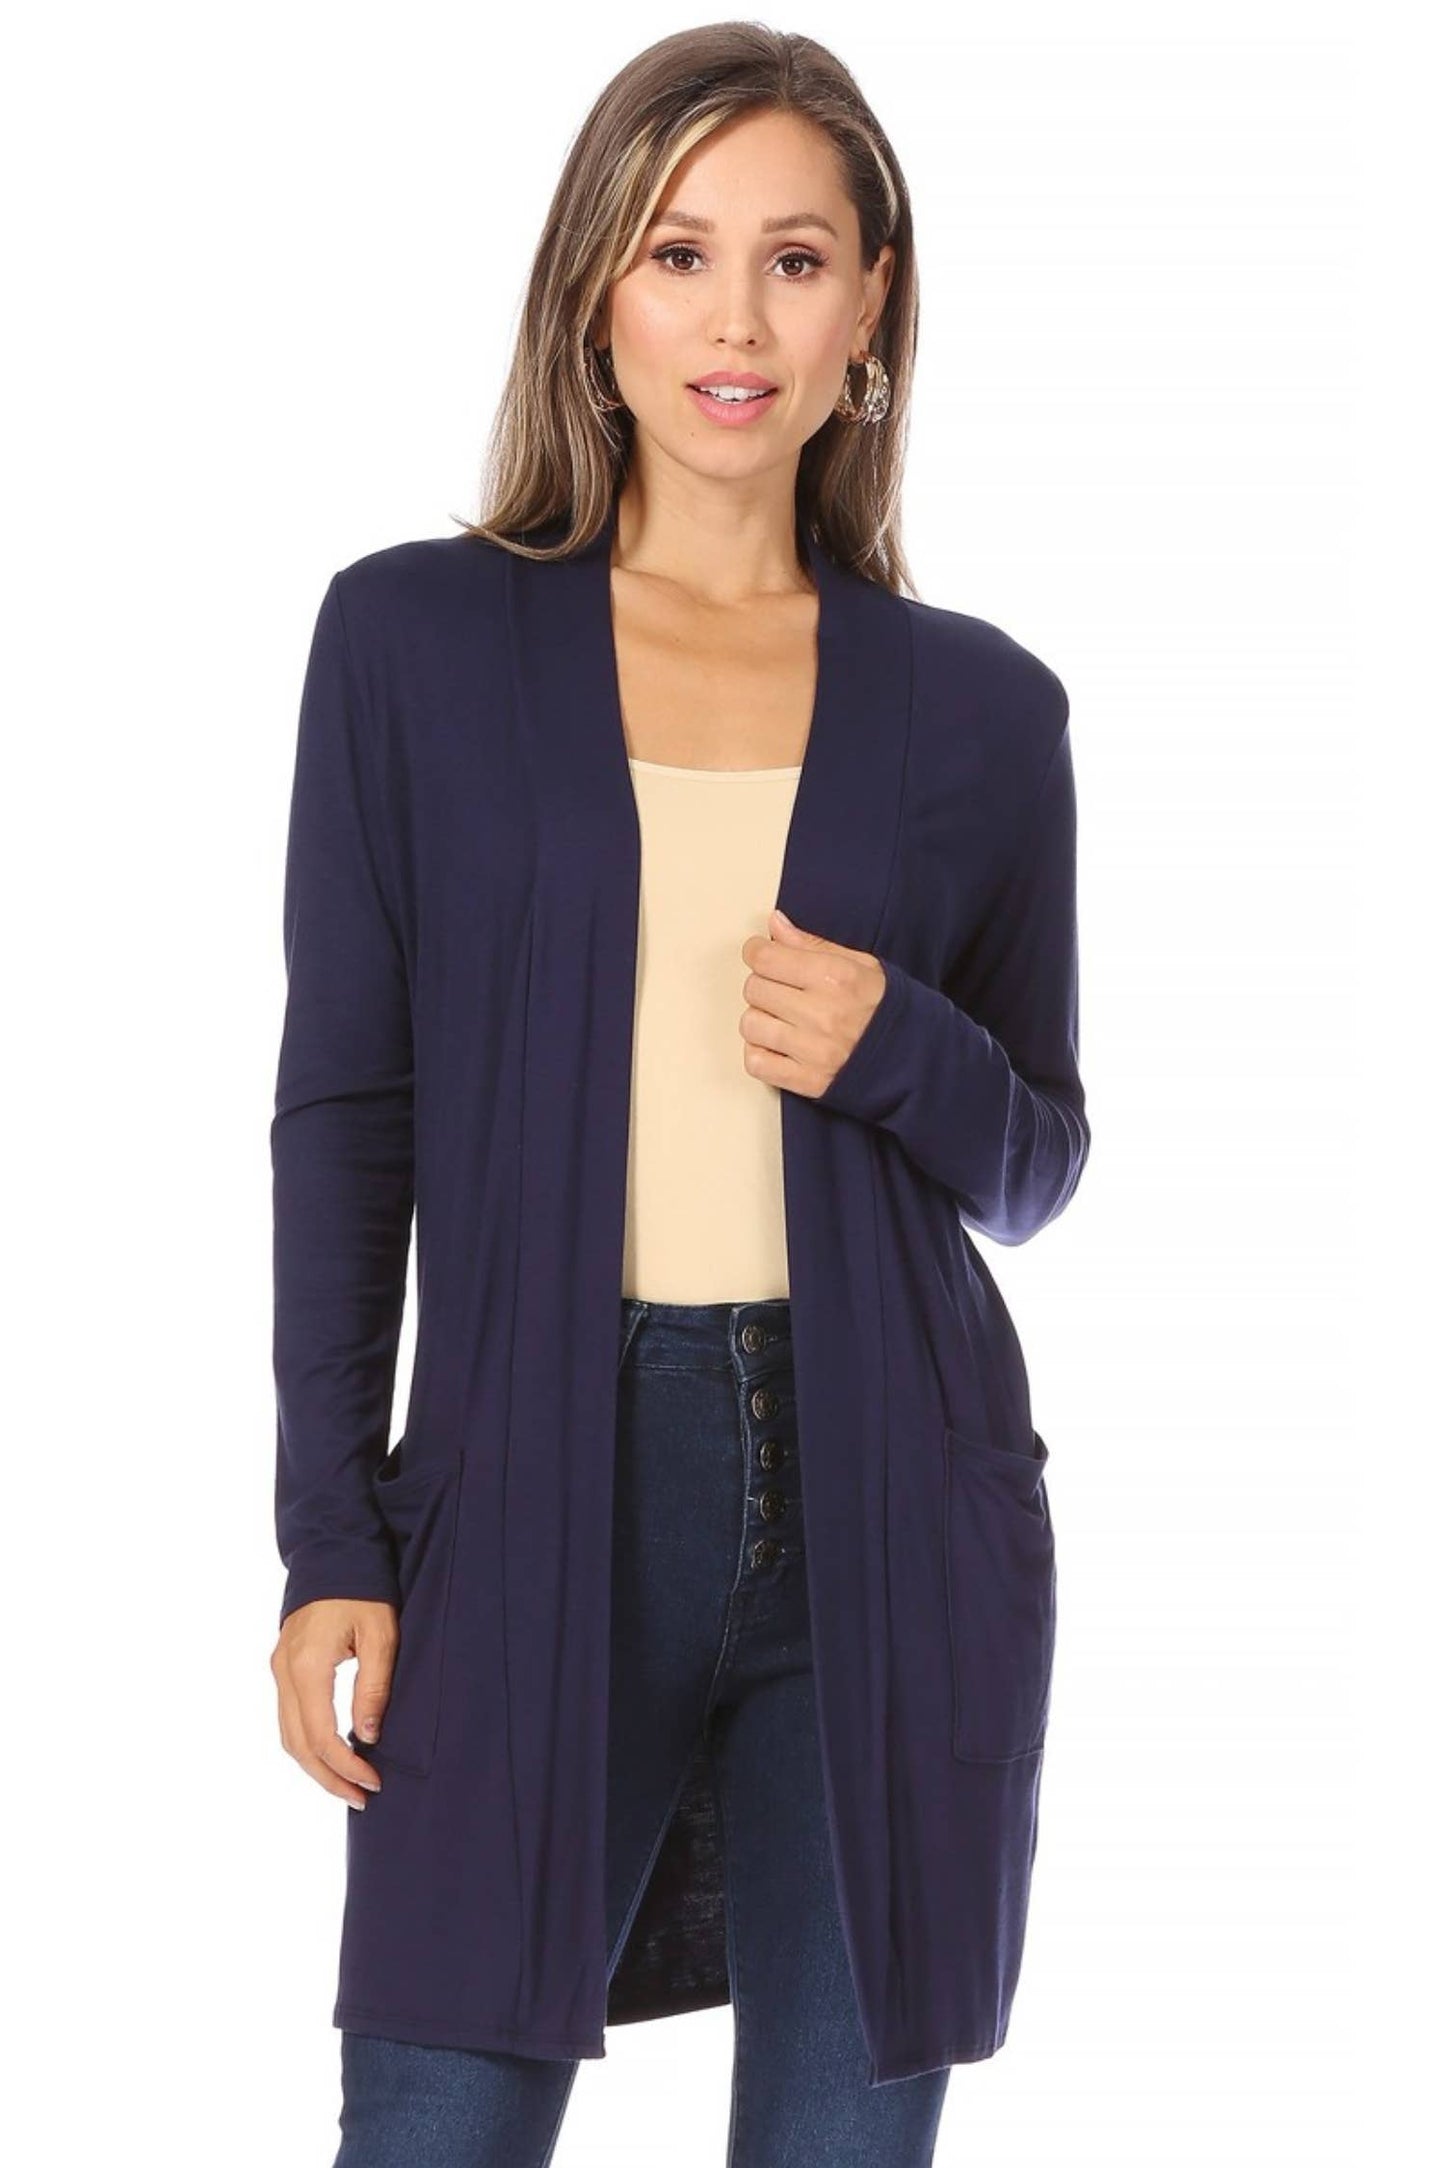 Women's Long Sleeves Side Pockets Solid Cardigan (Open Pack): Large / Plum